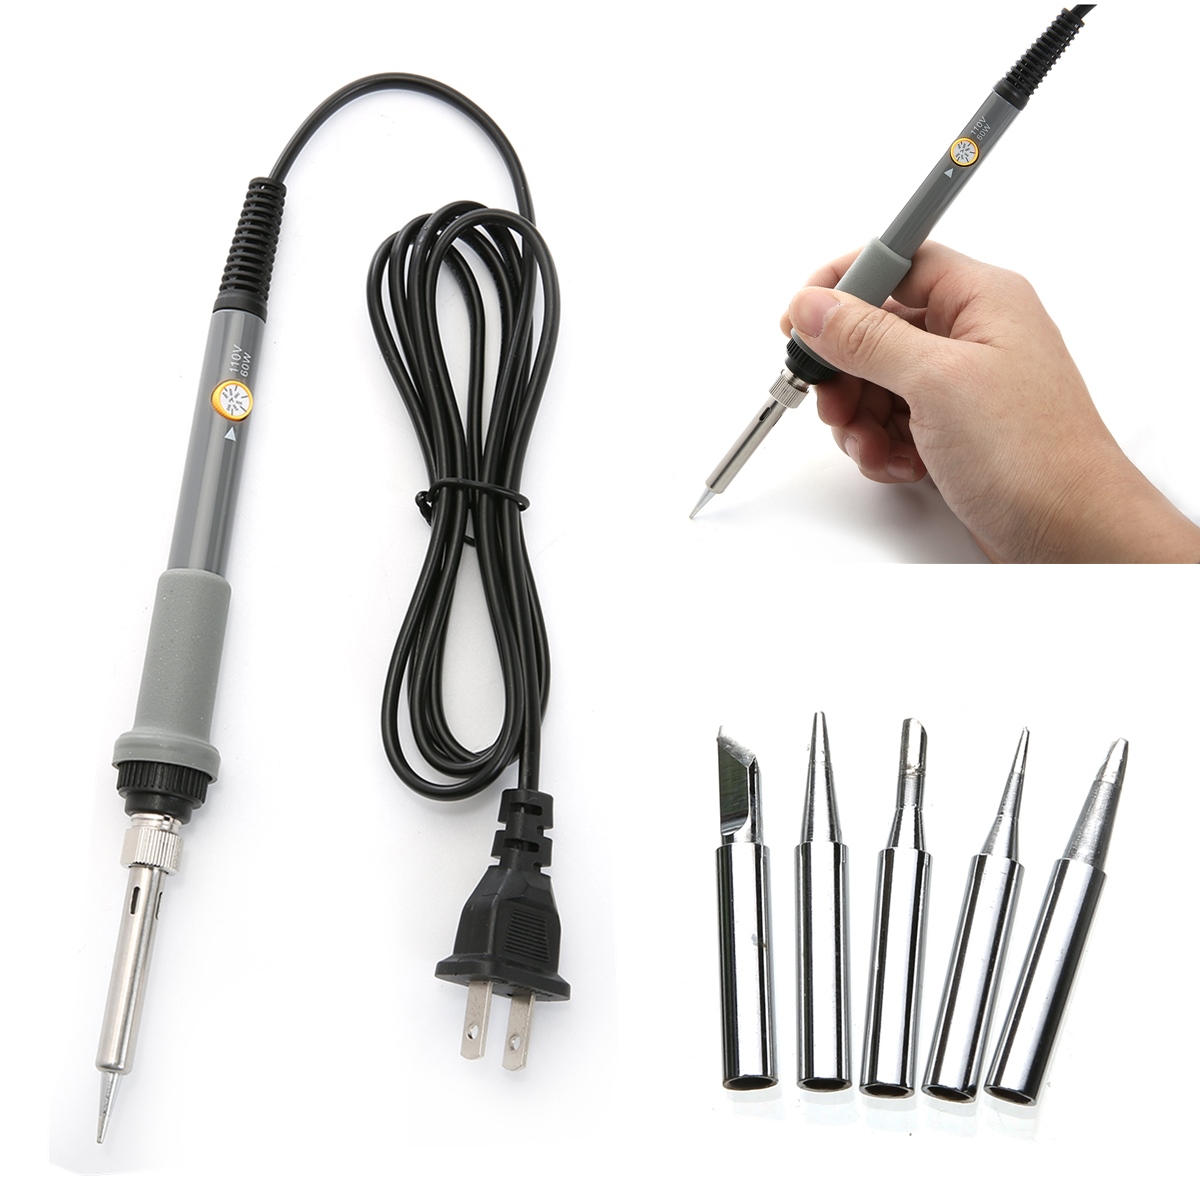 110V-Adjustable-Electric-Temperature-Welding-Solder-Iron-Tool-Solder-with-5Pcs-Tips-1299696-2